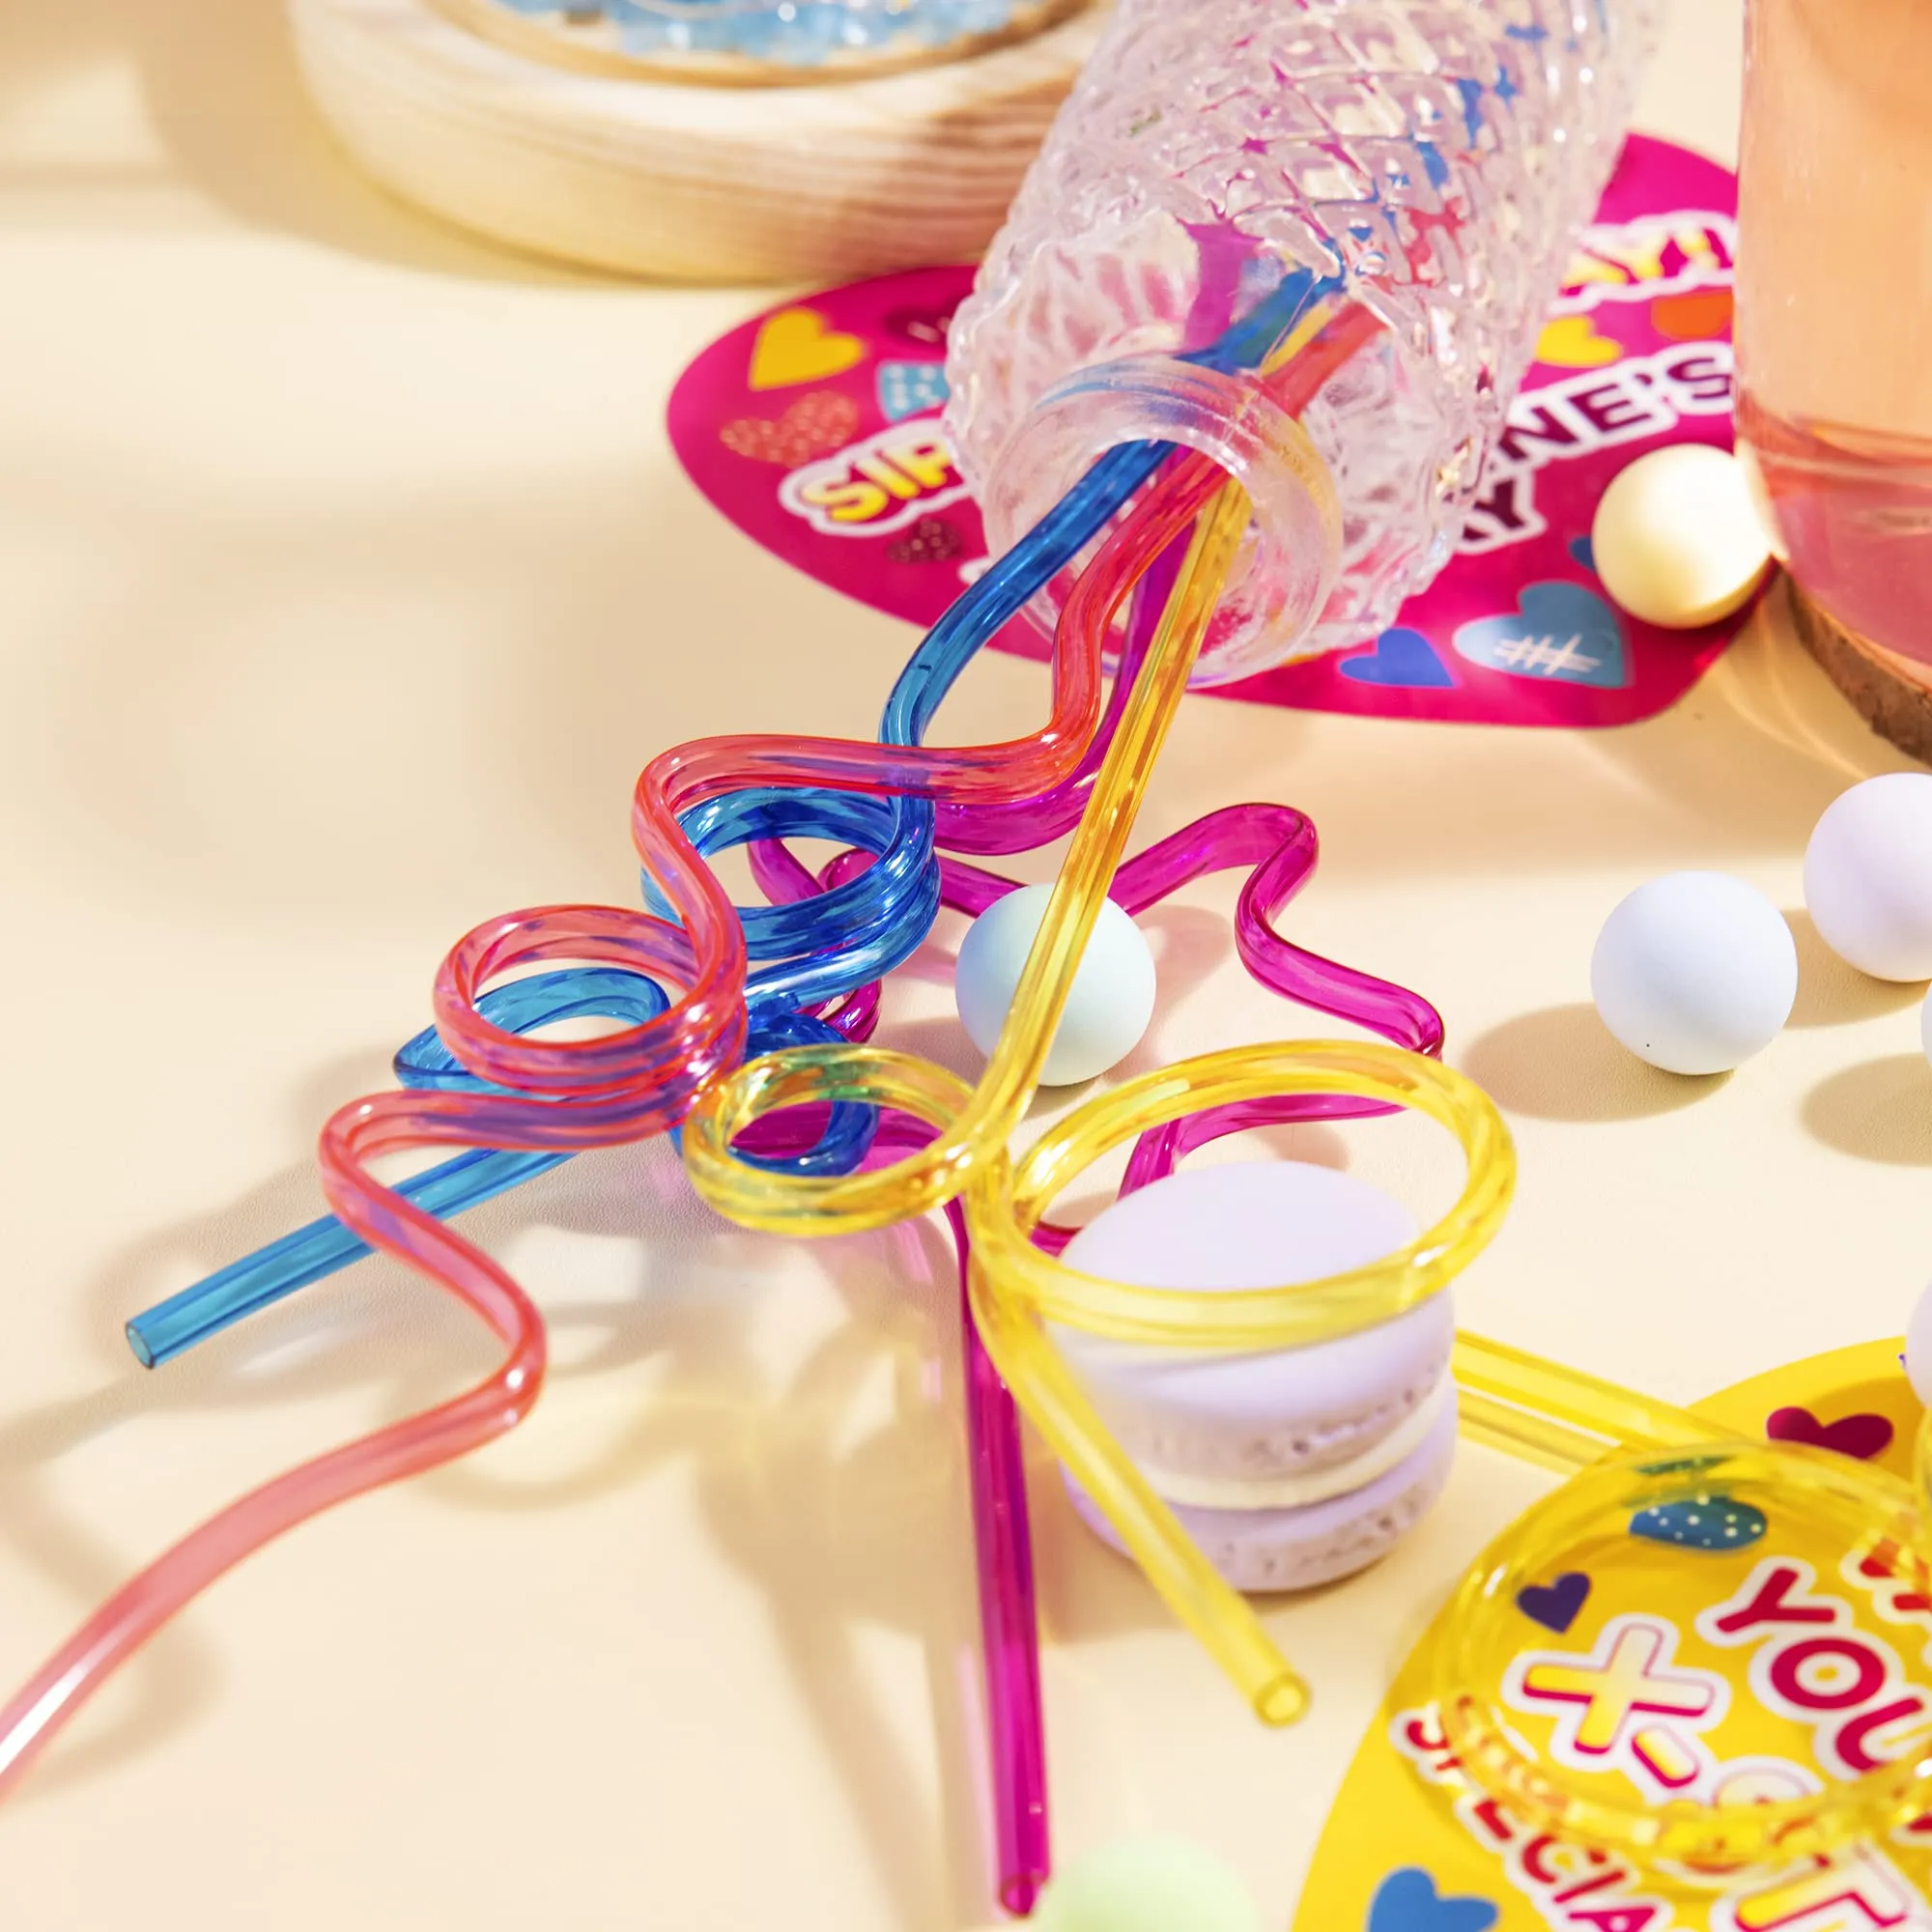 https://www.joyfy.com/wp-content/uploads/2023/01/28Pcs-Kids-Valentines-Cards-with-Gift-Colorful-Crazy-Loop-Reusable-Drinking-Straws-8_result-1.webp